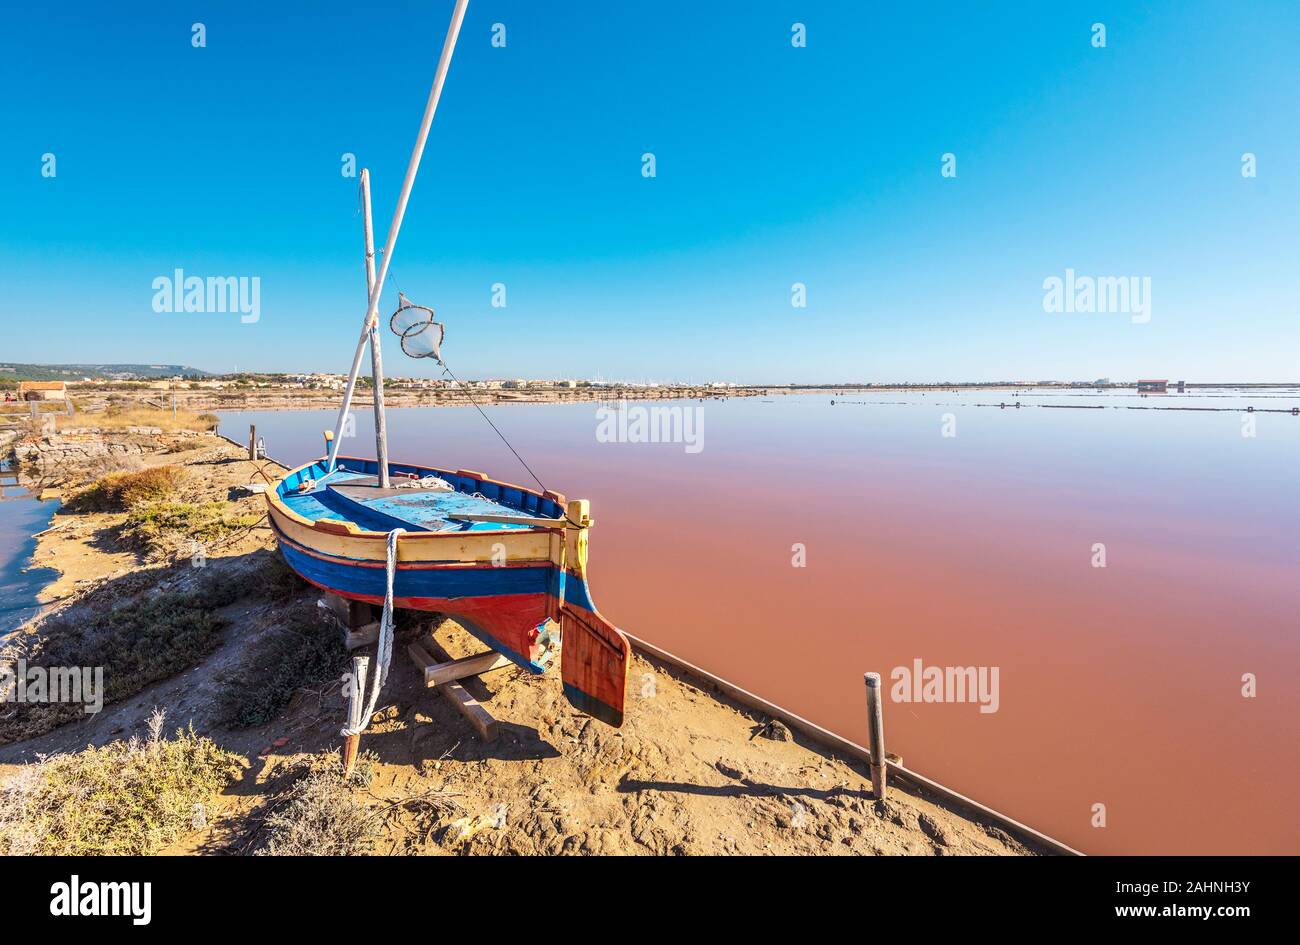 Saline island of Saint Martin de Gruissans, the old wooden ship at left and the reddish colored saturated with salt water at right.  Occitanie, France Stock Photo